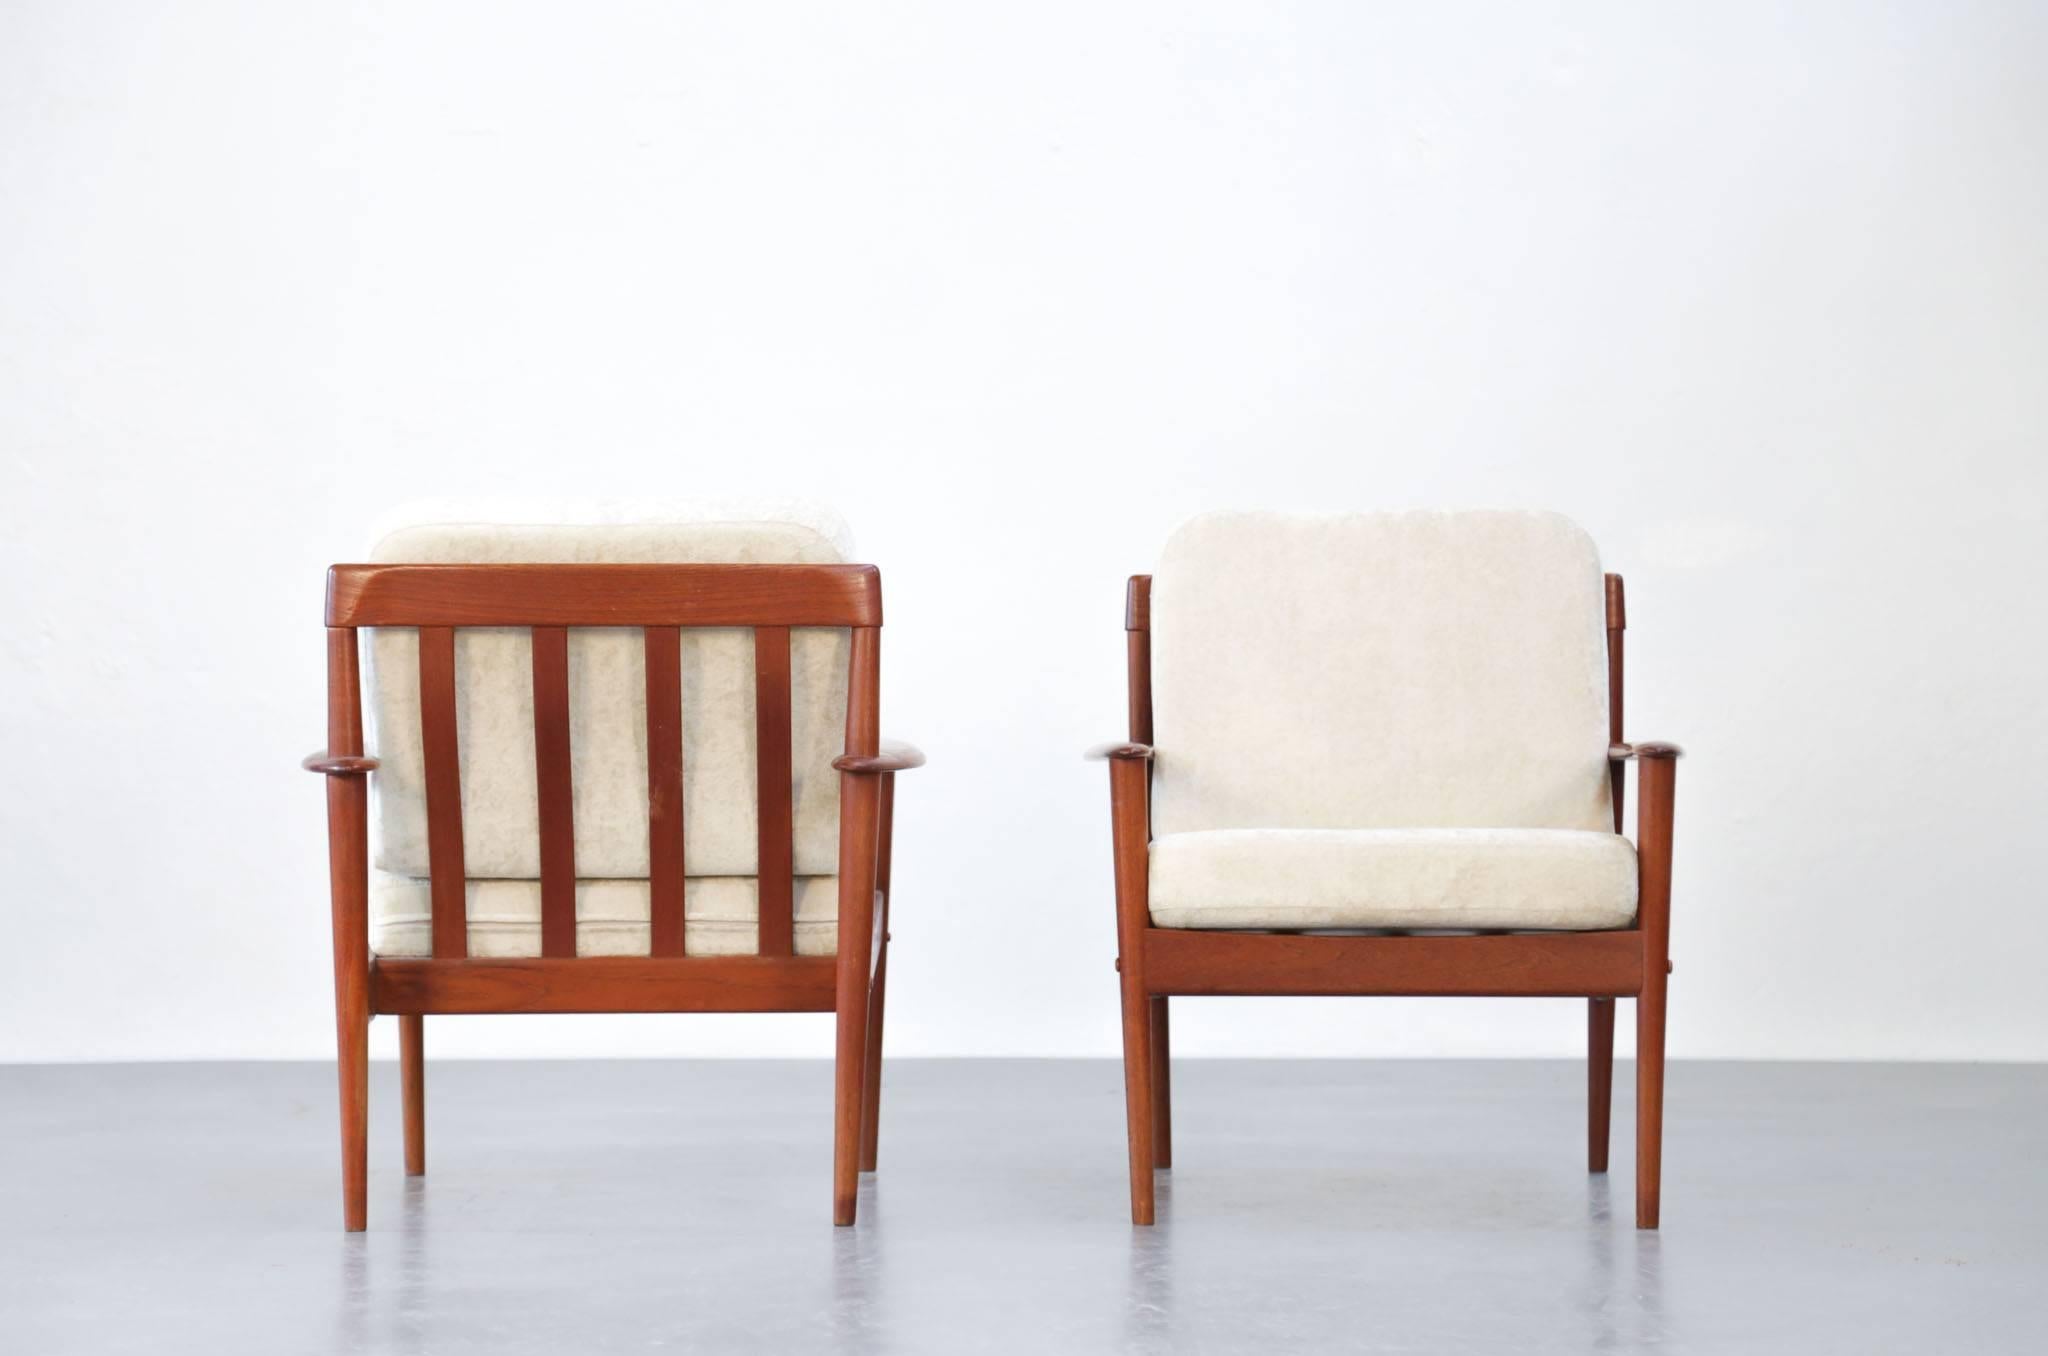 Pair of Lounge Chairs Grete Jalk Danish Teak, 1960s For Sale 3